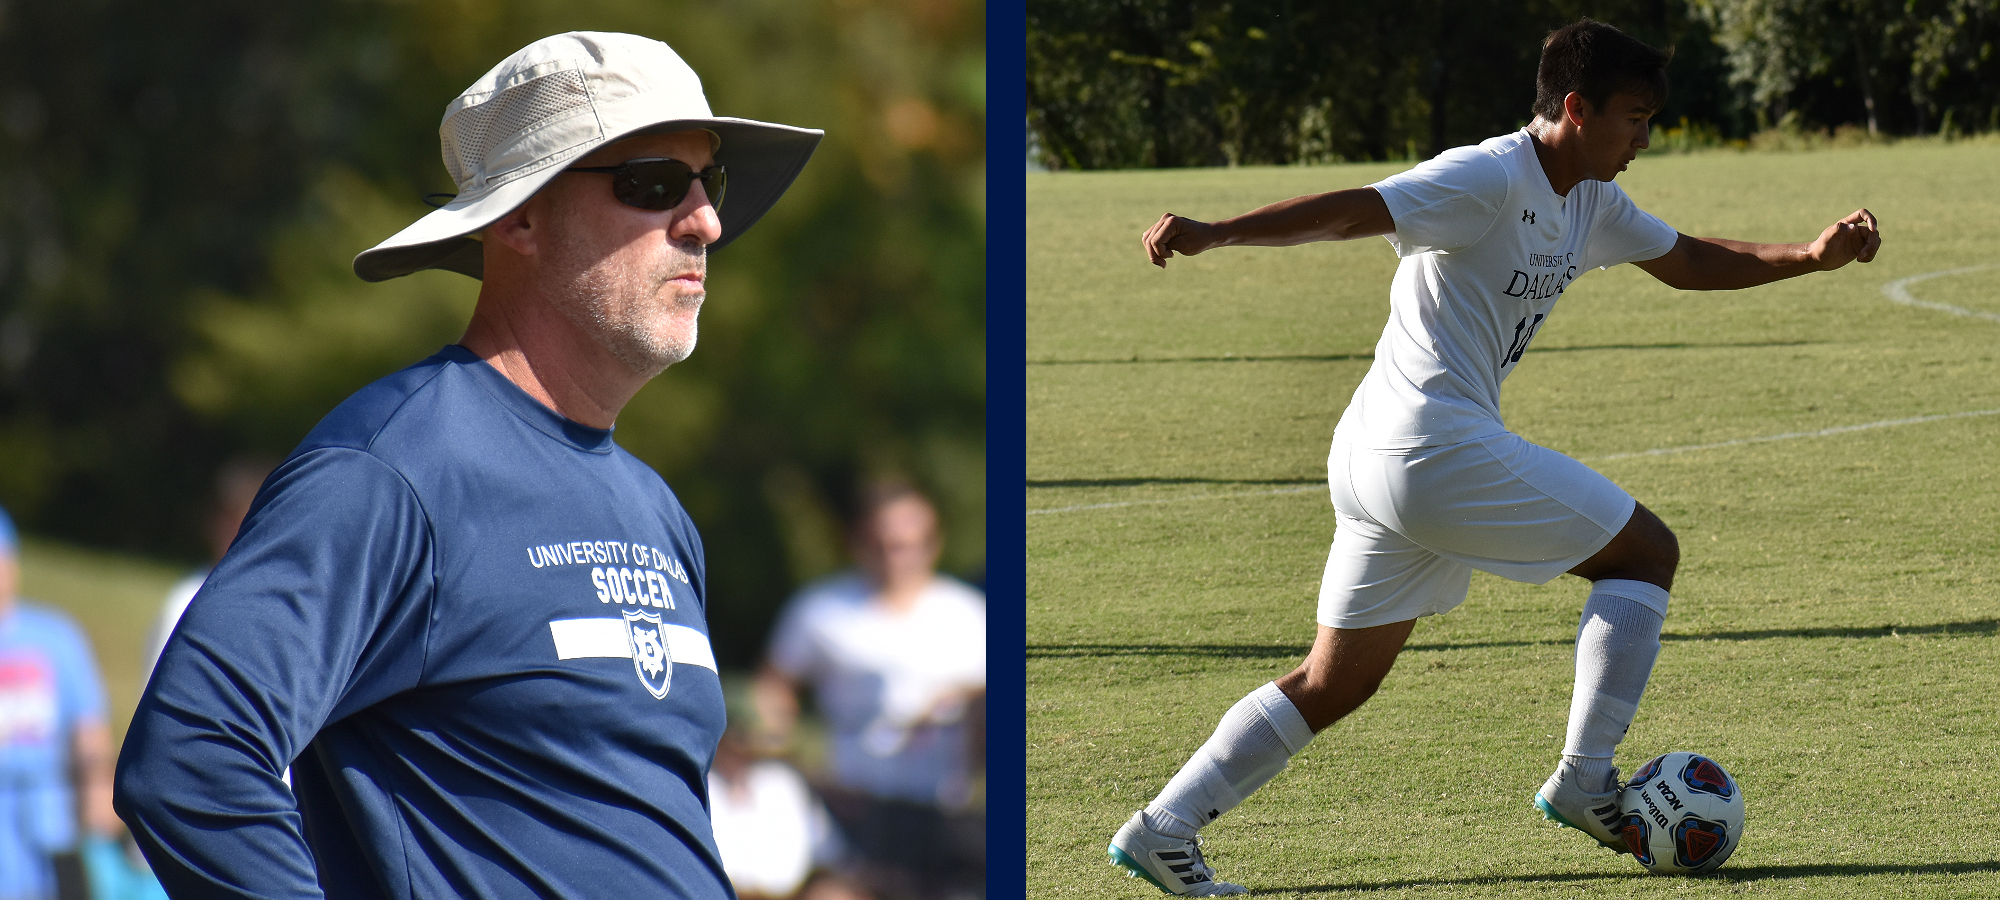 Coach Hoffmann (Coach-of-the-Year) and Kajiwara (Newcomer-of-the-Year) Headline All-SCAC Men's Soccer Awards